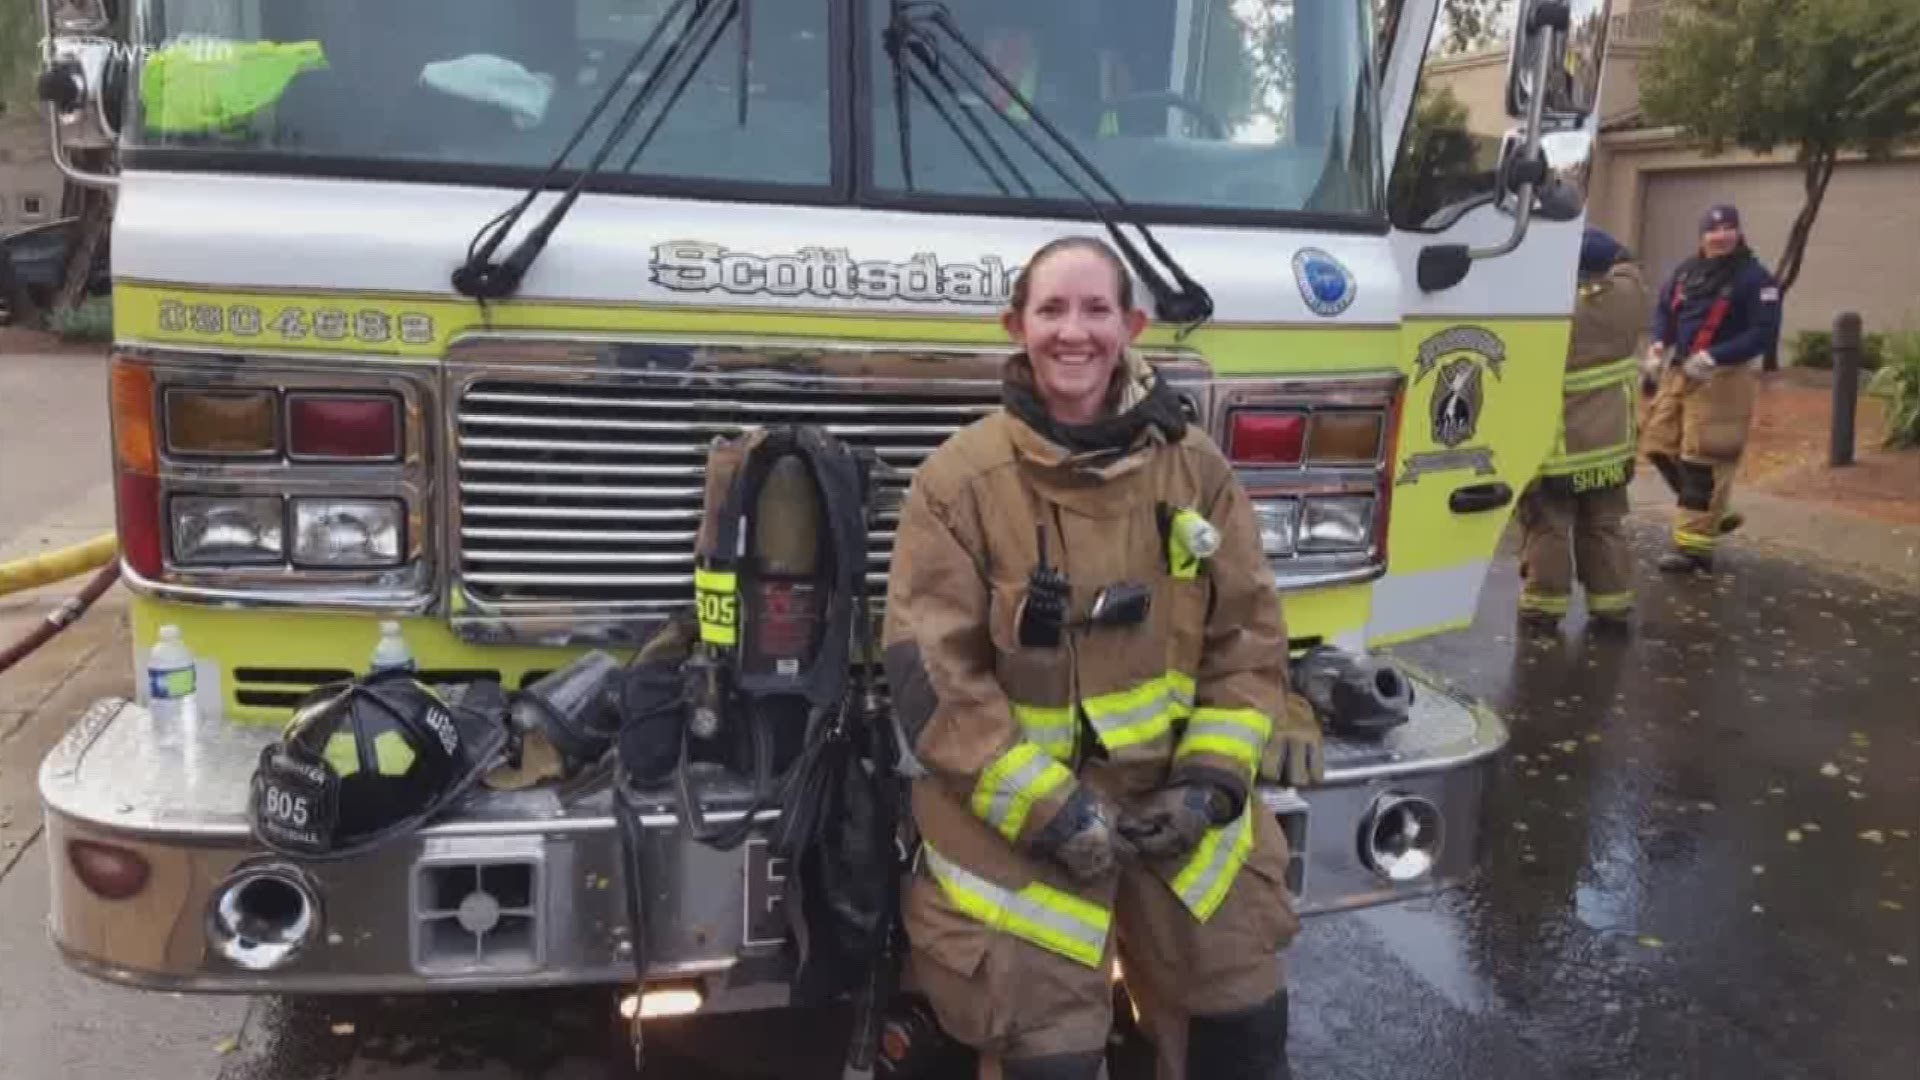 Jessie Vazquez, a female firefighter with the Scottsdale fire department, is looking to the future to inspire other women to join the force.